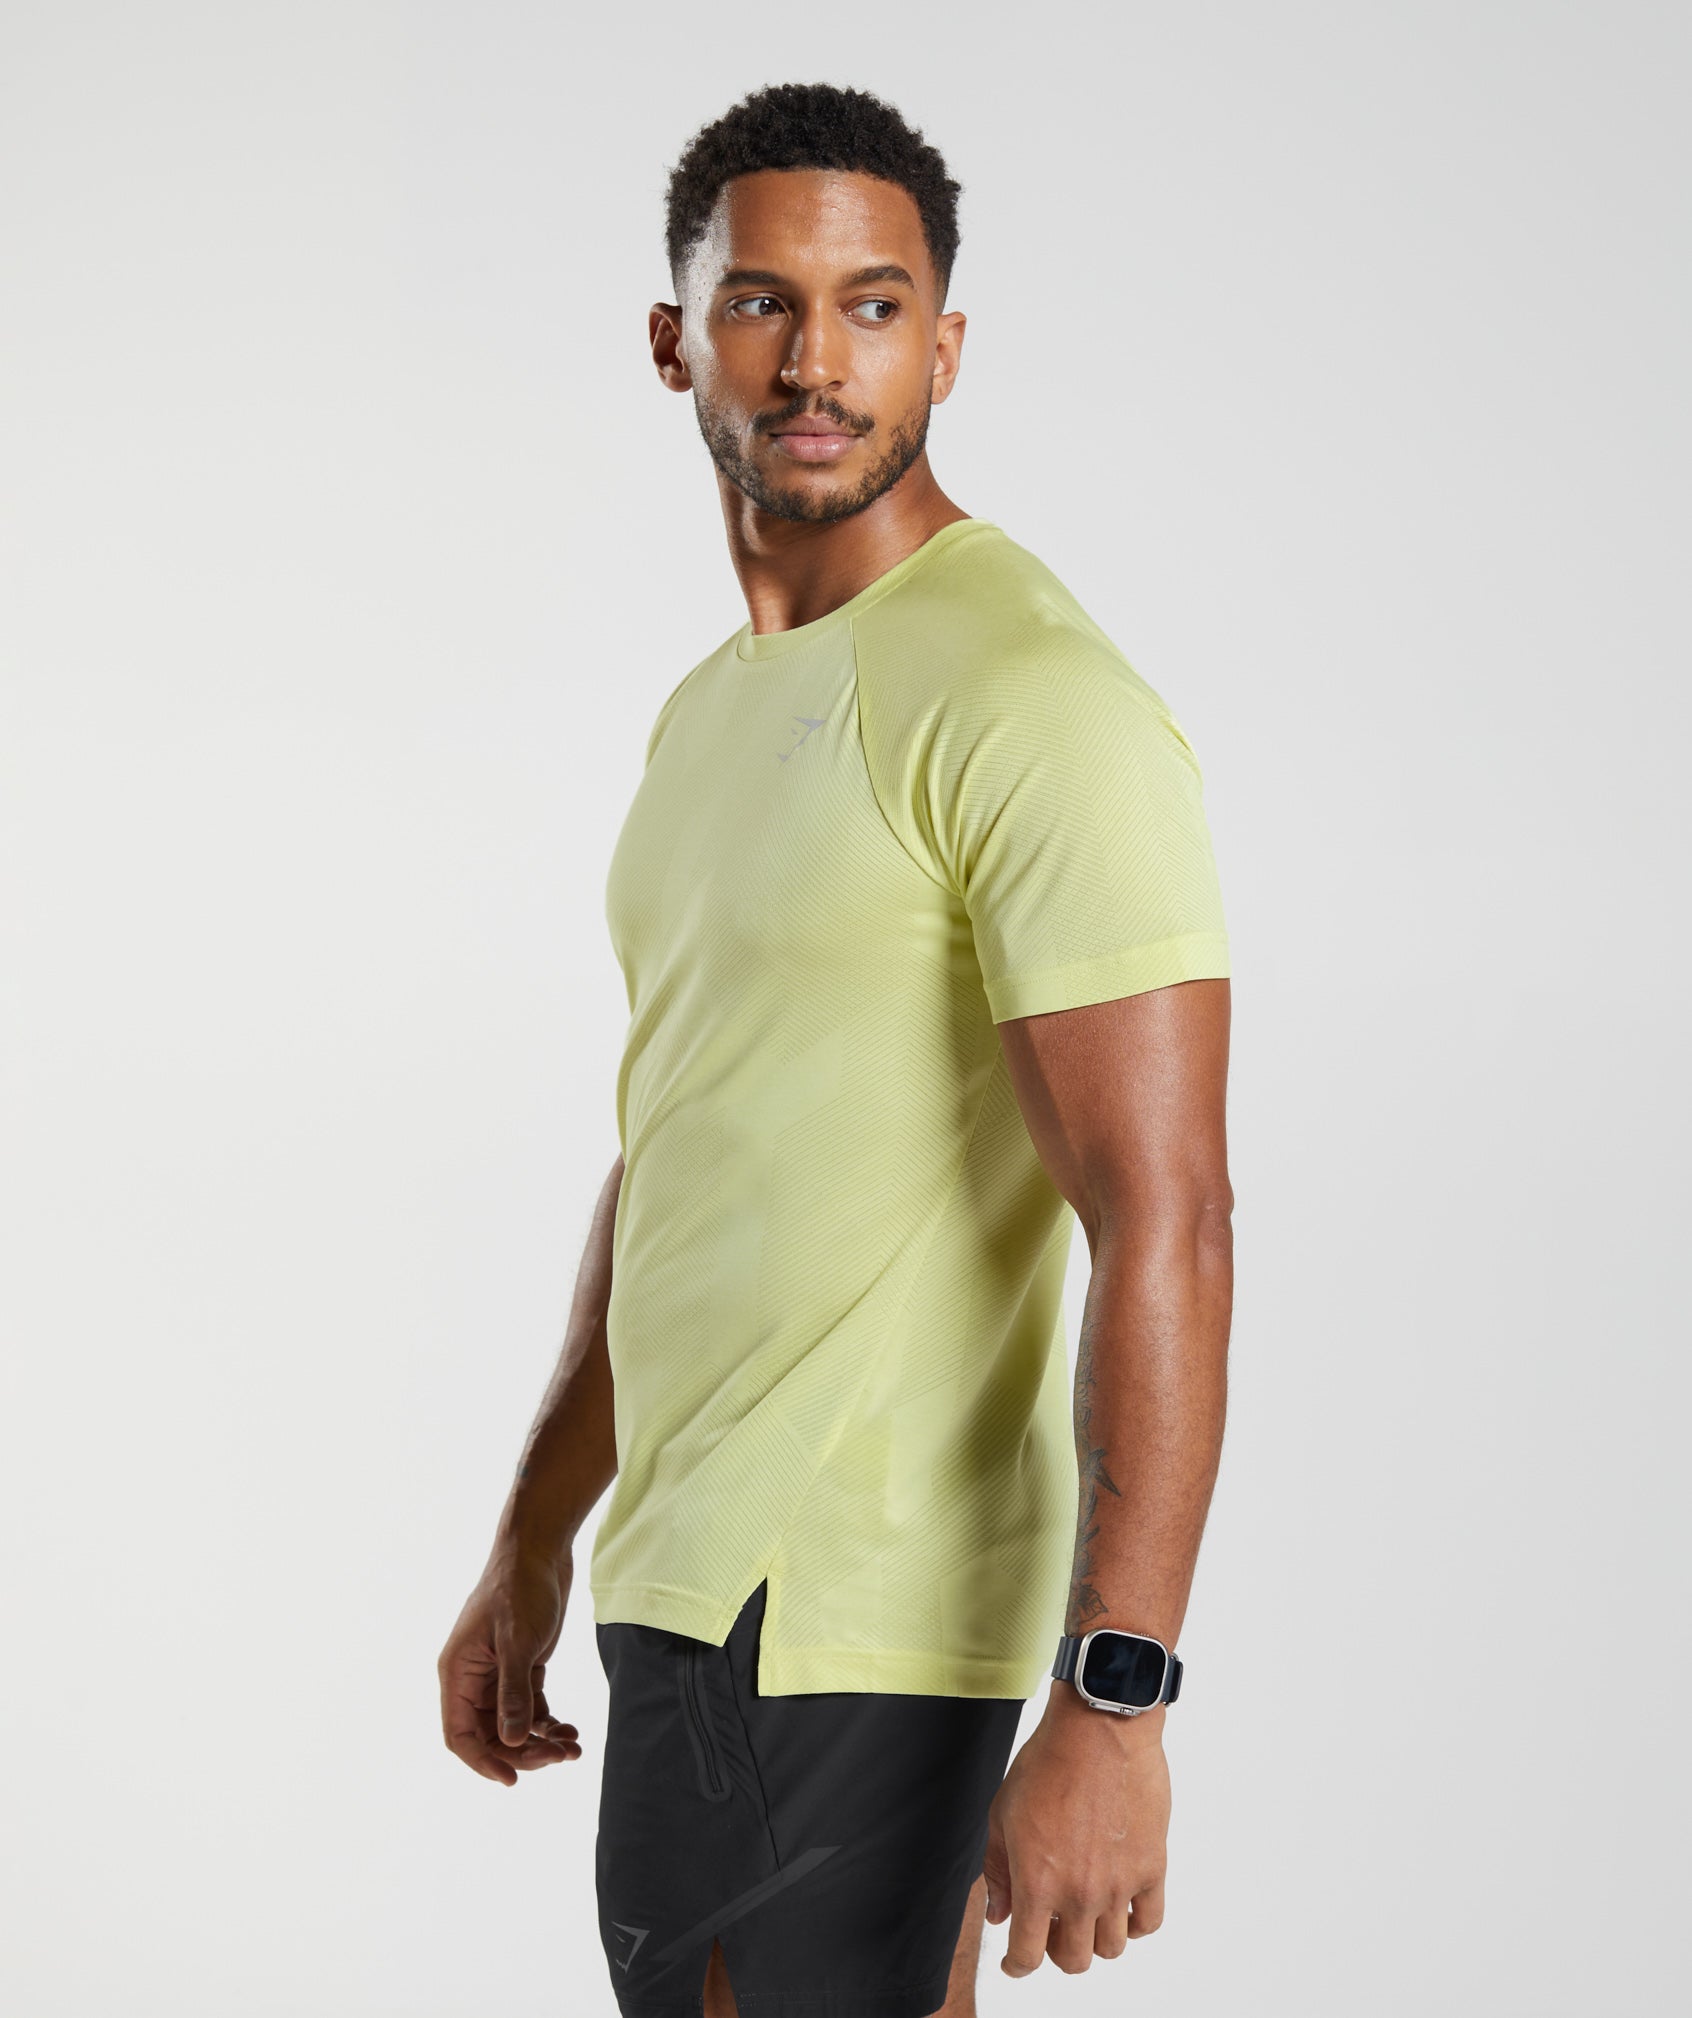 Apex T-Shirt in Firefly Green/White